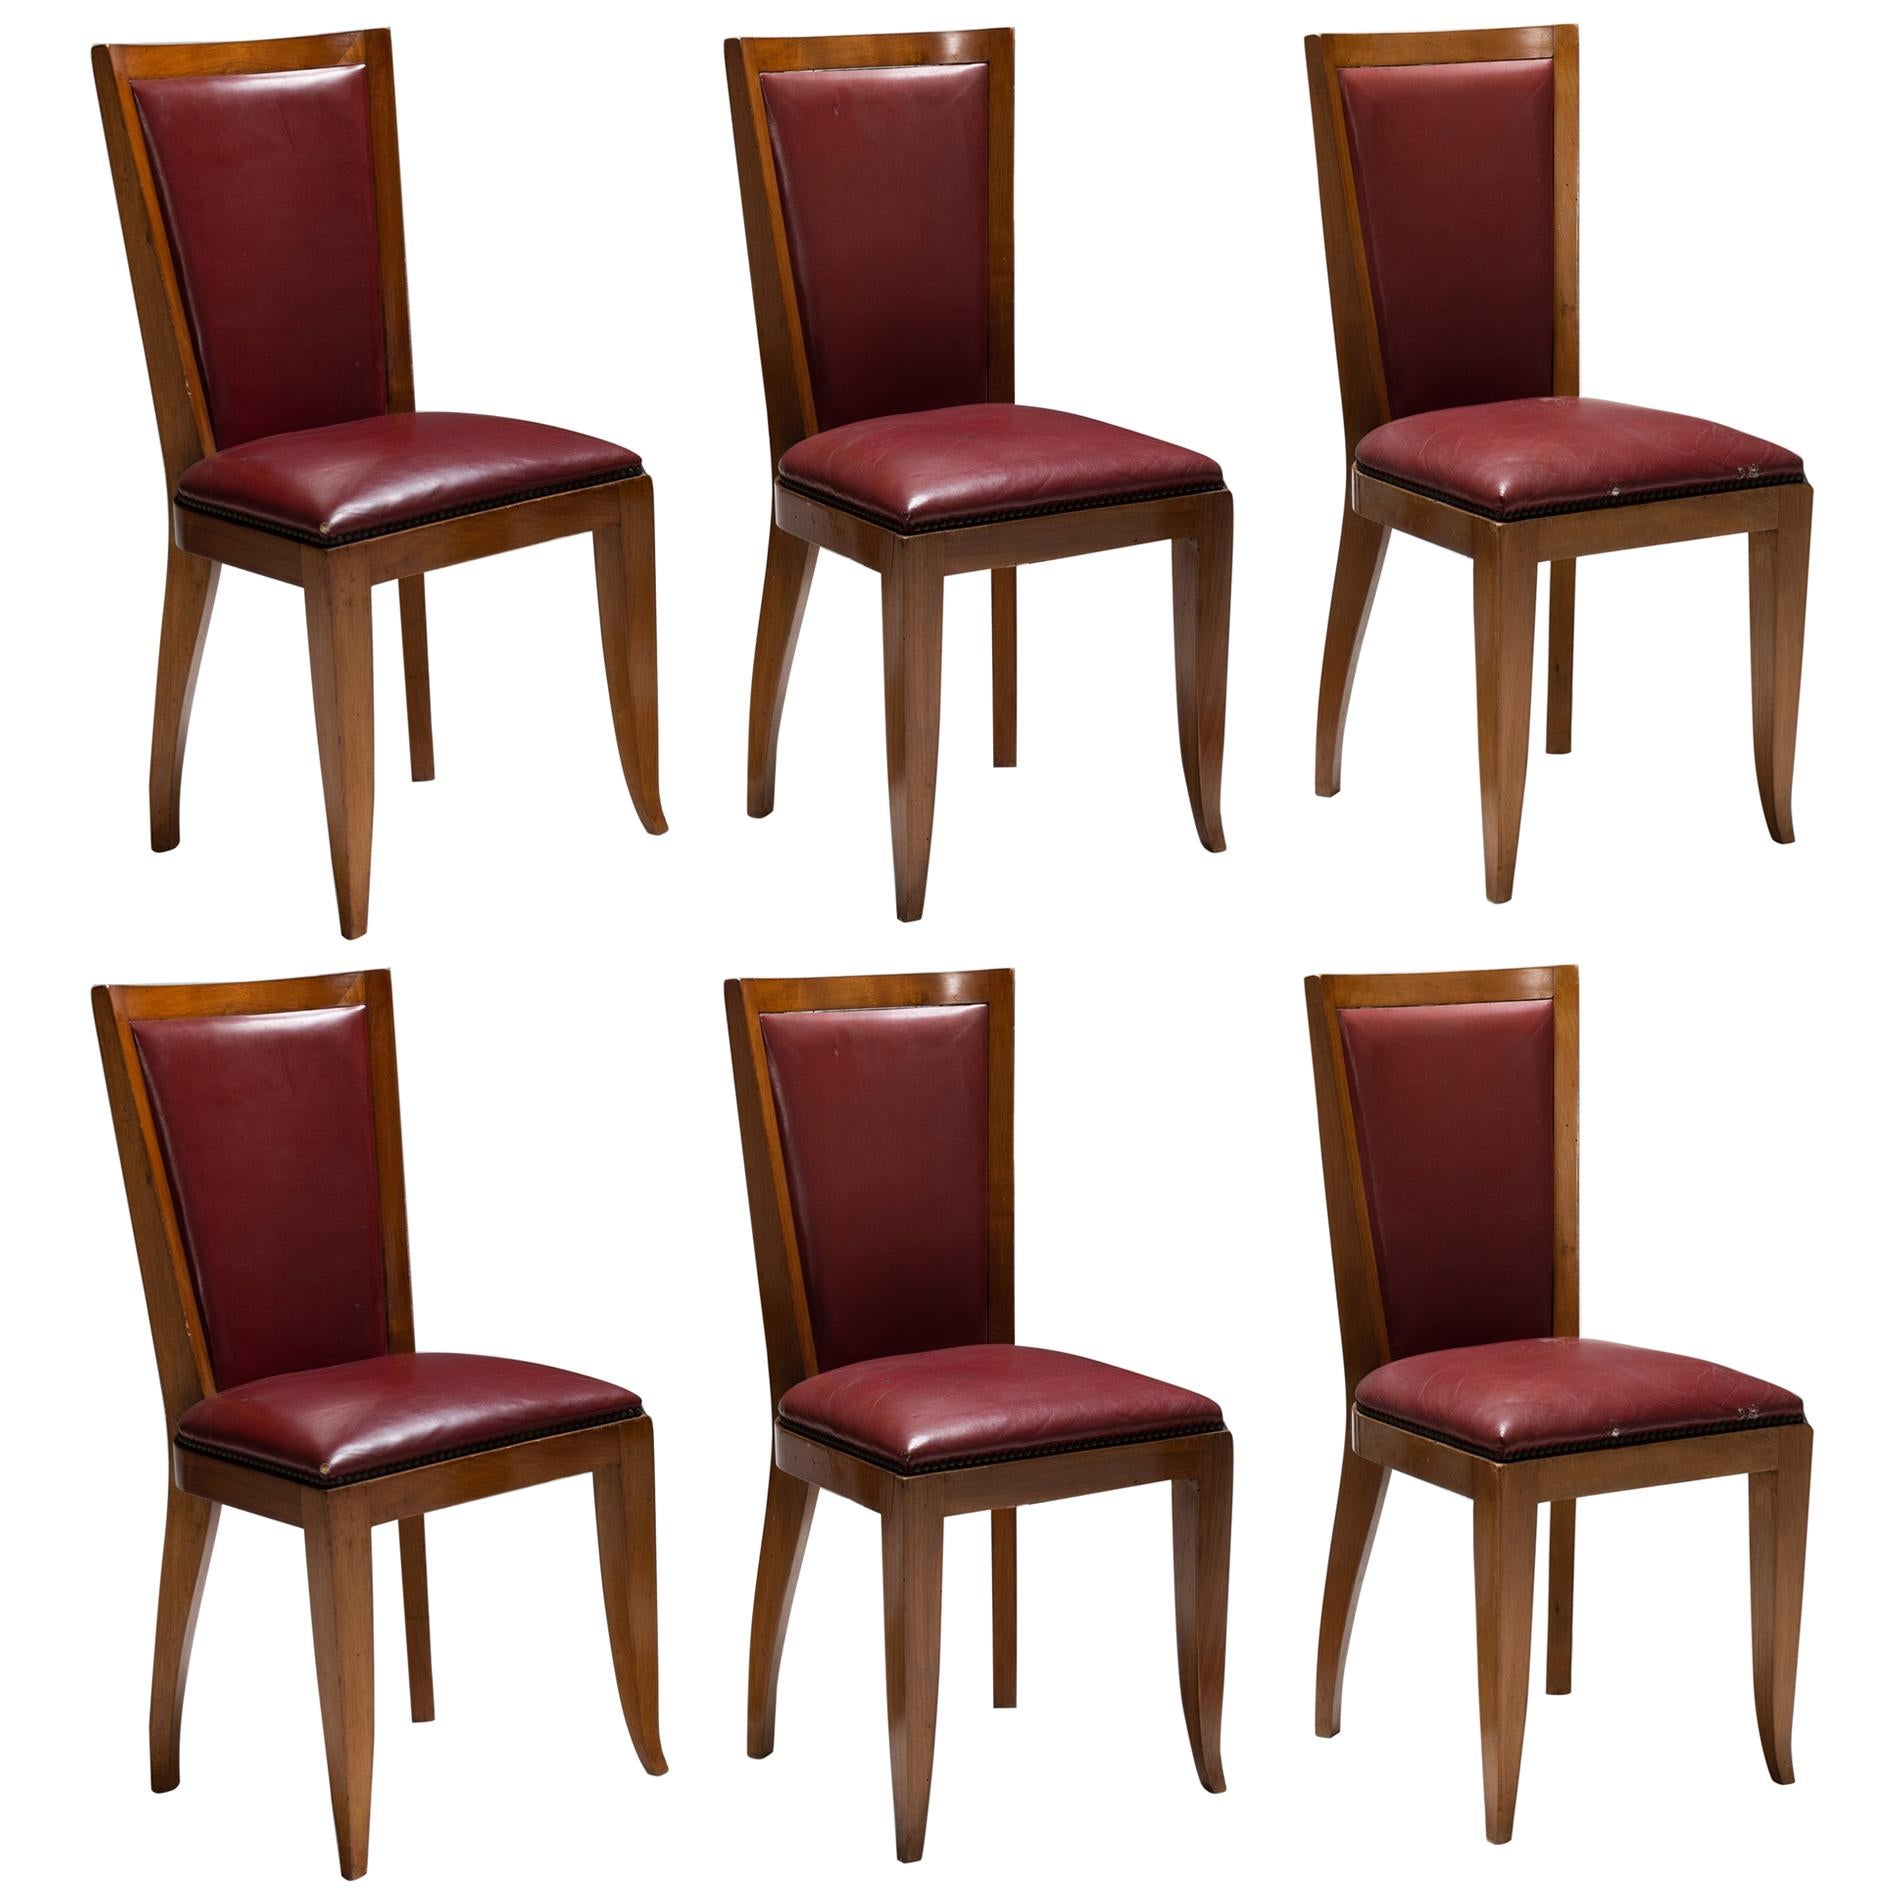 Set of '6' Cherrywood Dining Chairs